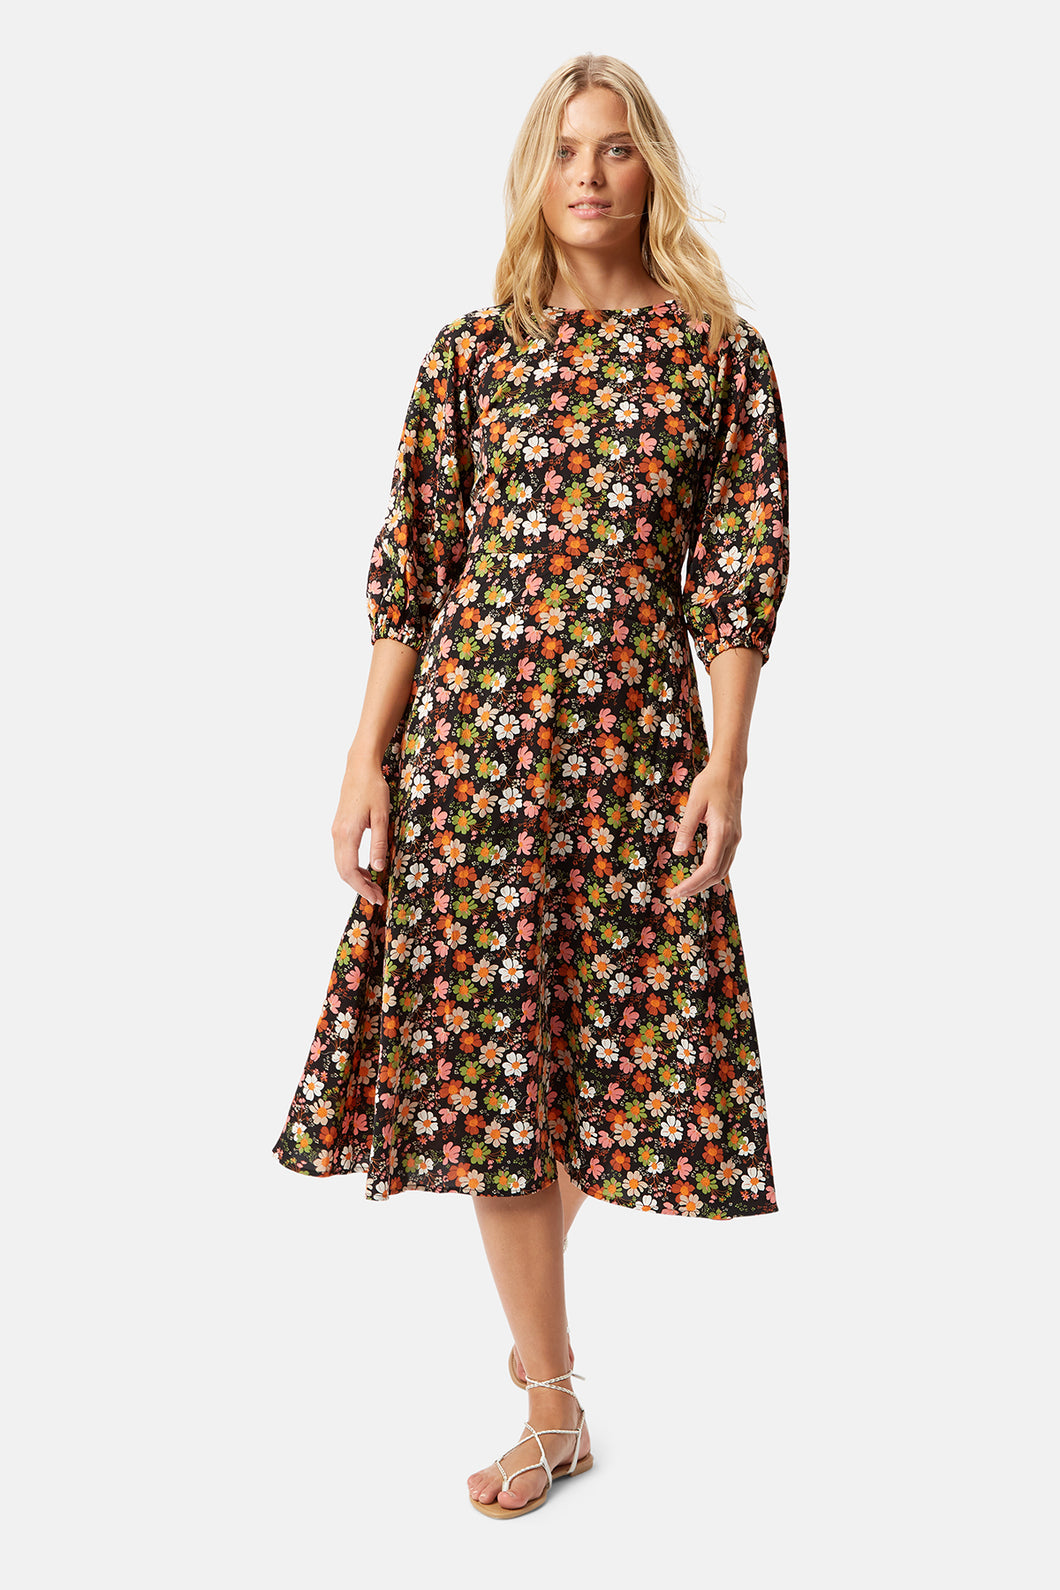 Bow Down Floral Dress